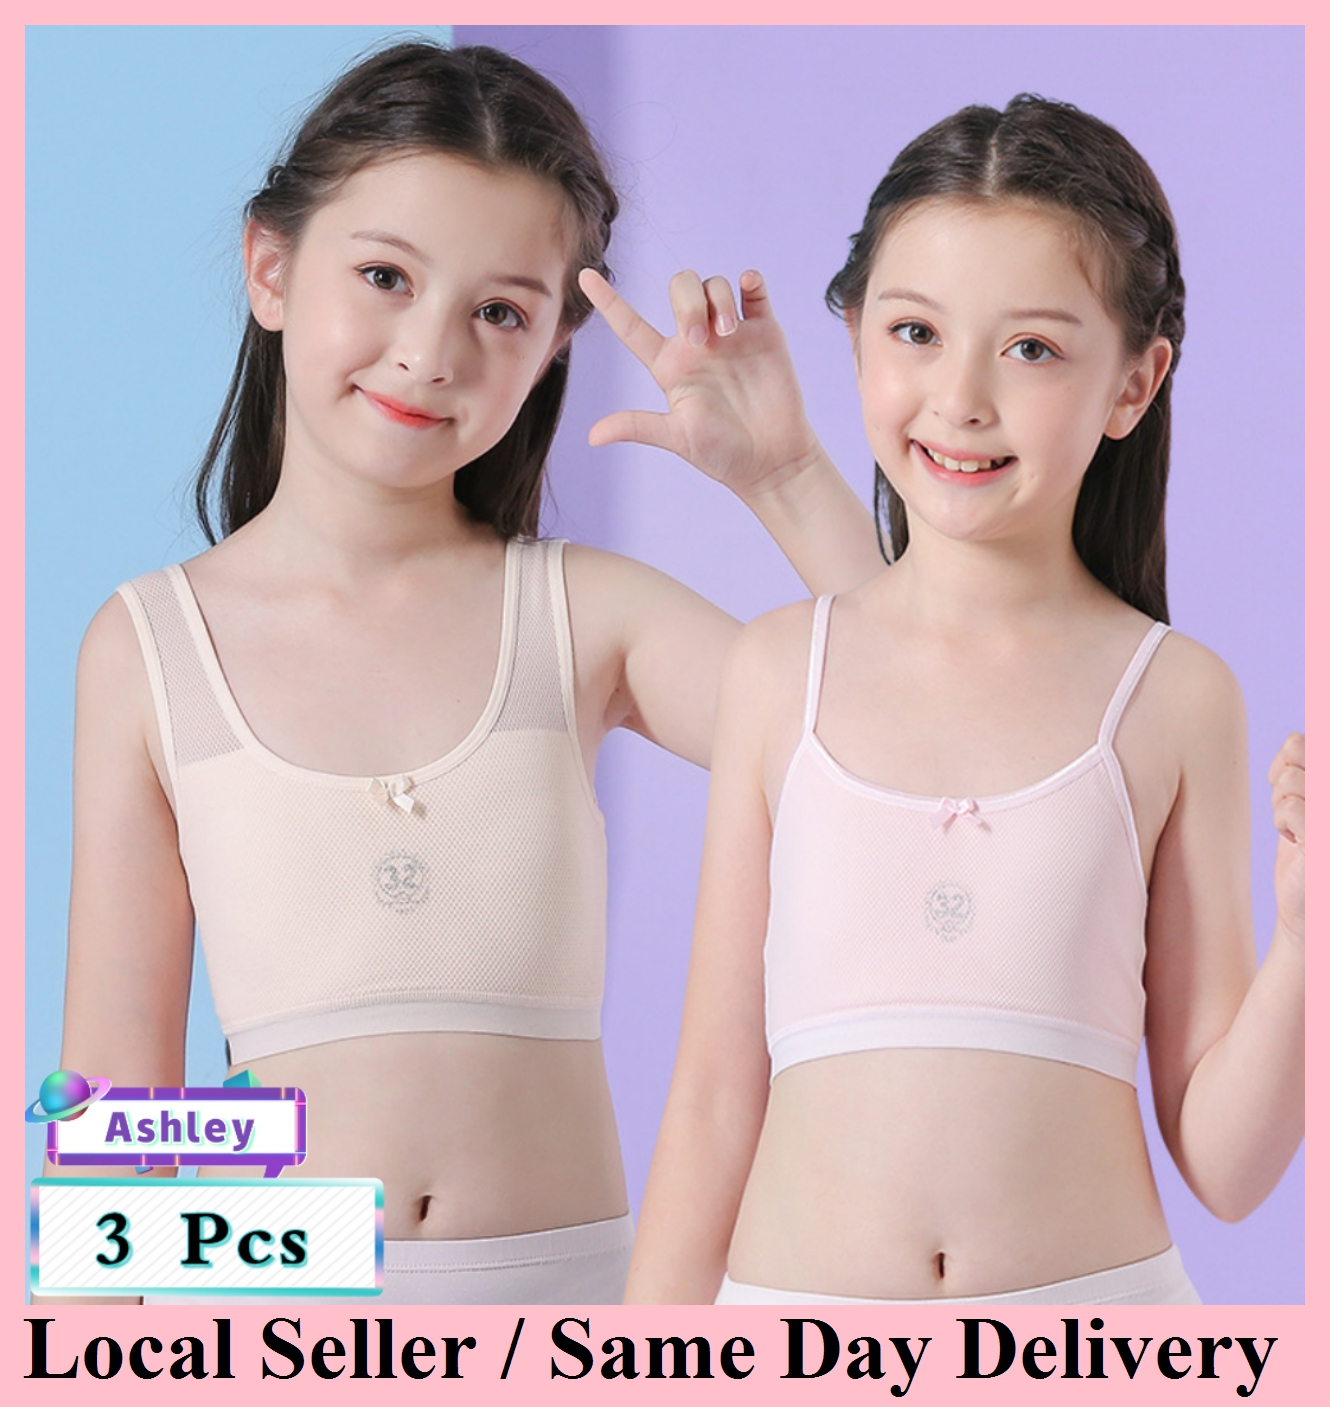 Sporty Racerback Puberty Training Bra Camisole Set For Teen Girls Perfect  Gift For School And Training Available In Sizes 7 14Y From Leonardria,  $18.02